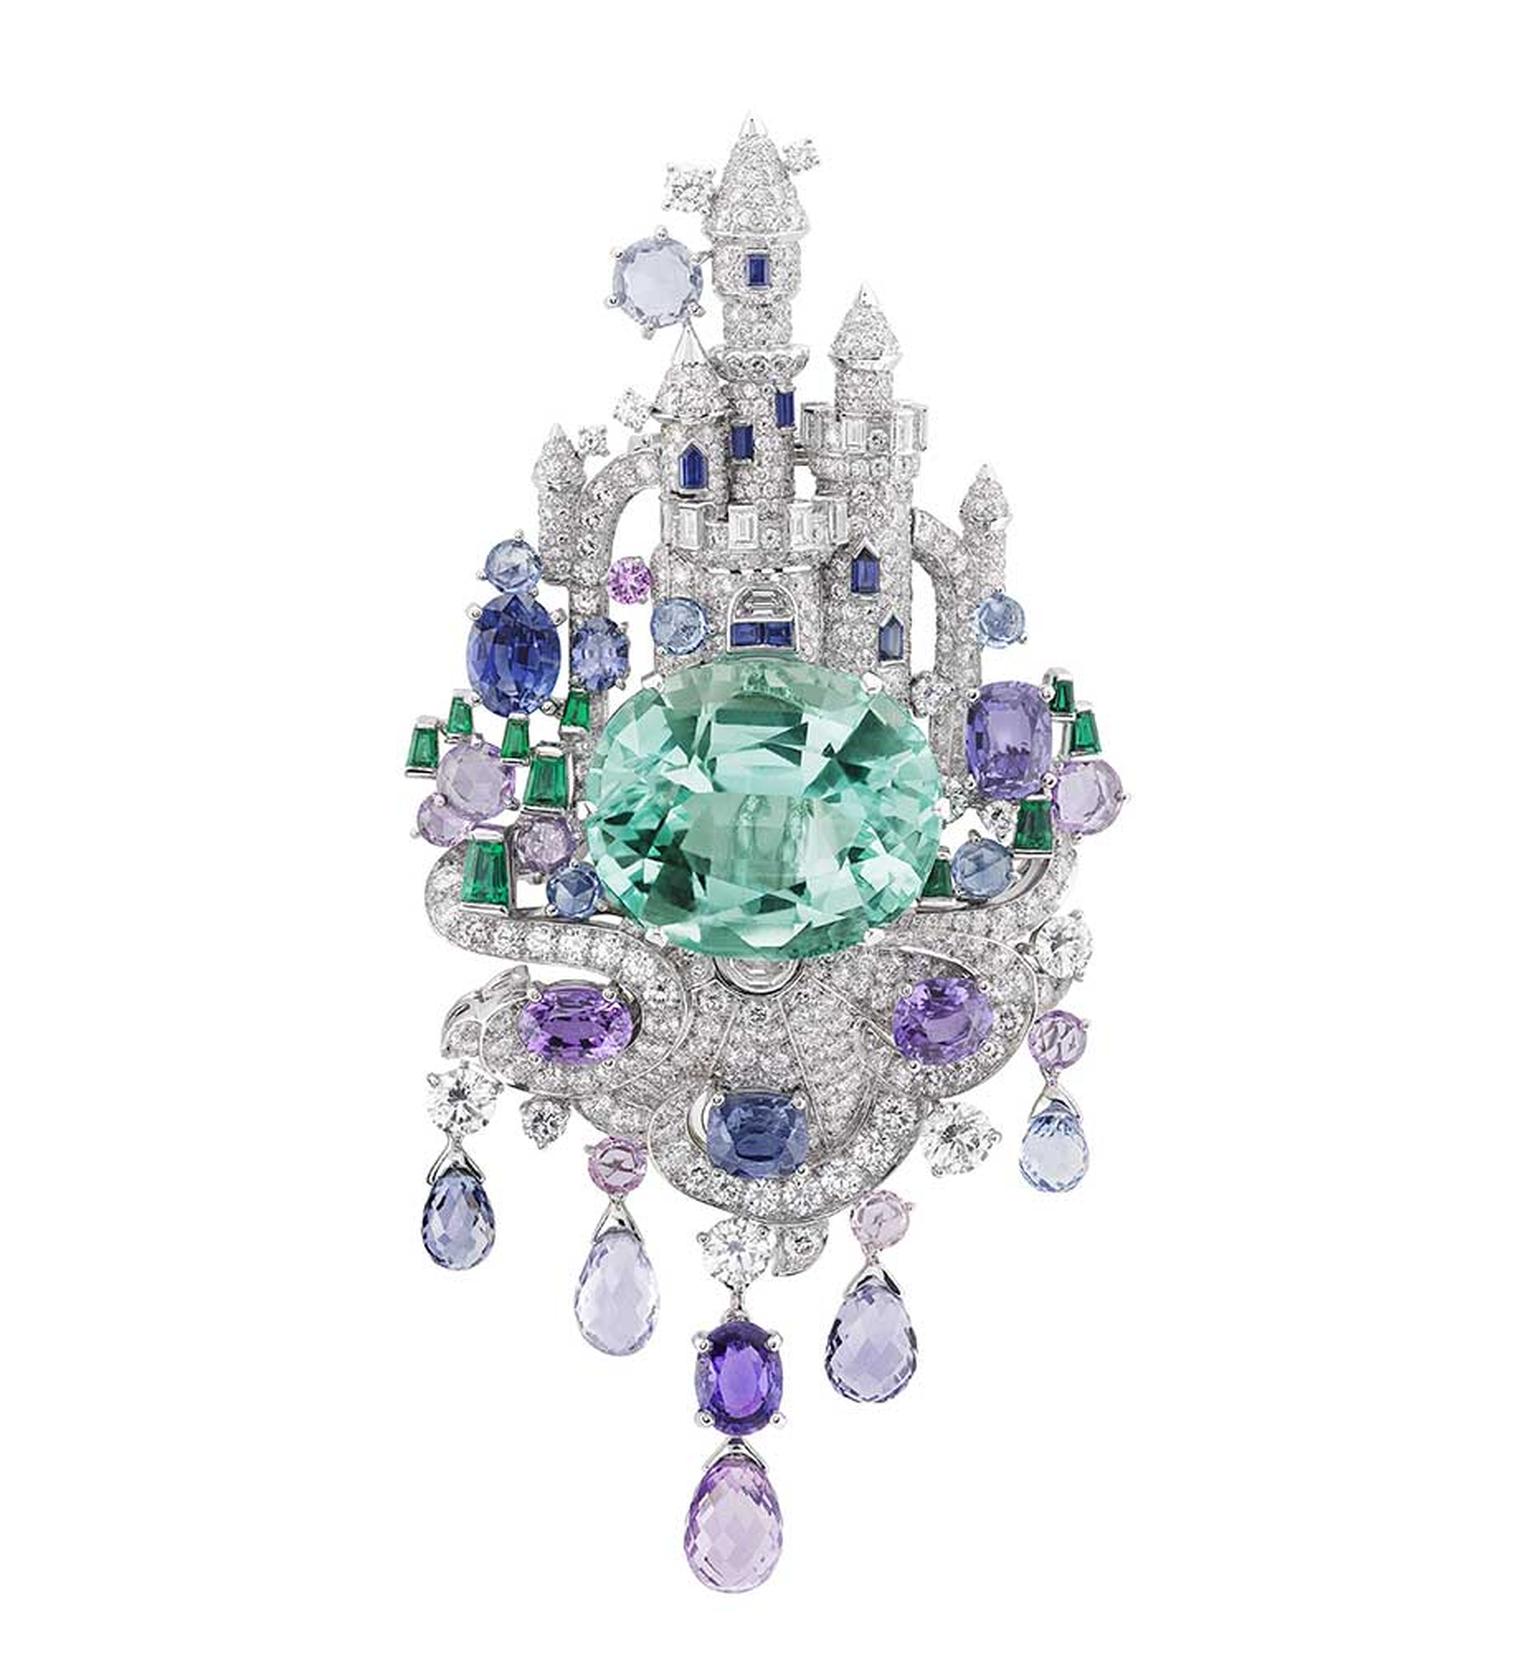 Van Cleef & Arpels Peau d'Âne collection white gold Enchanted Castle brooch featuring multiple cut diamonds, emeralds, sapphires and briolettes surrounding a 39ct oval cut emerald.